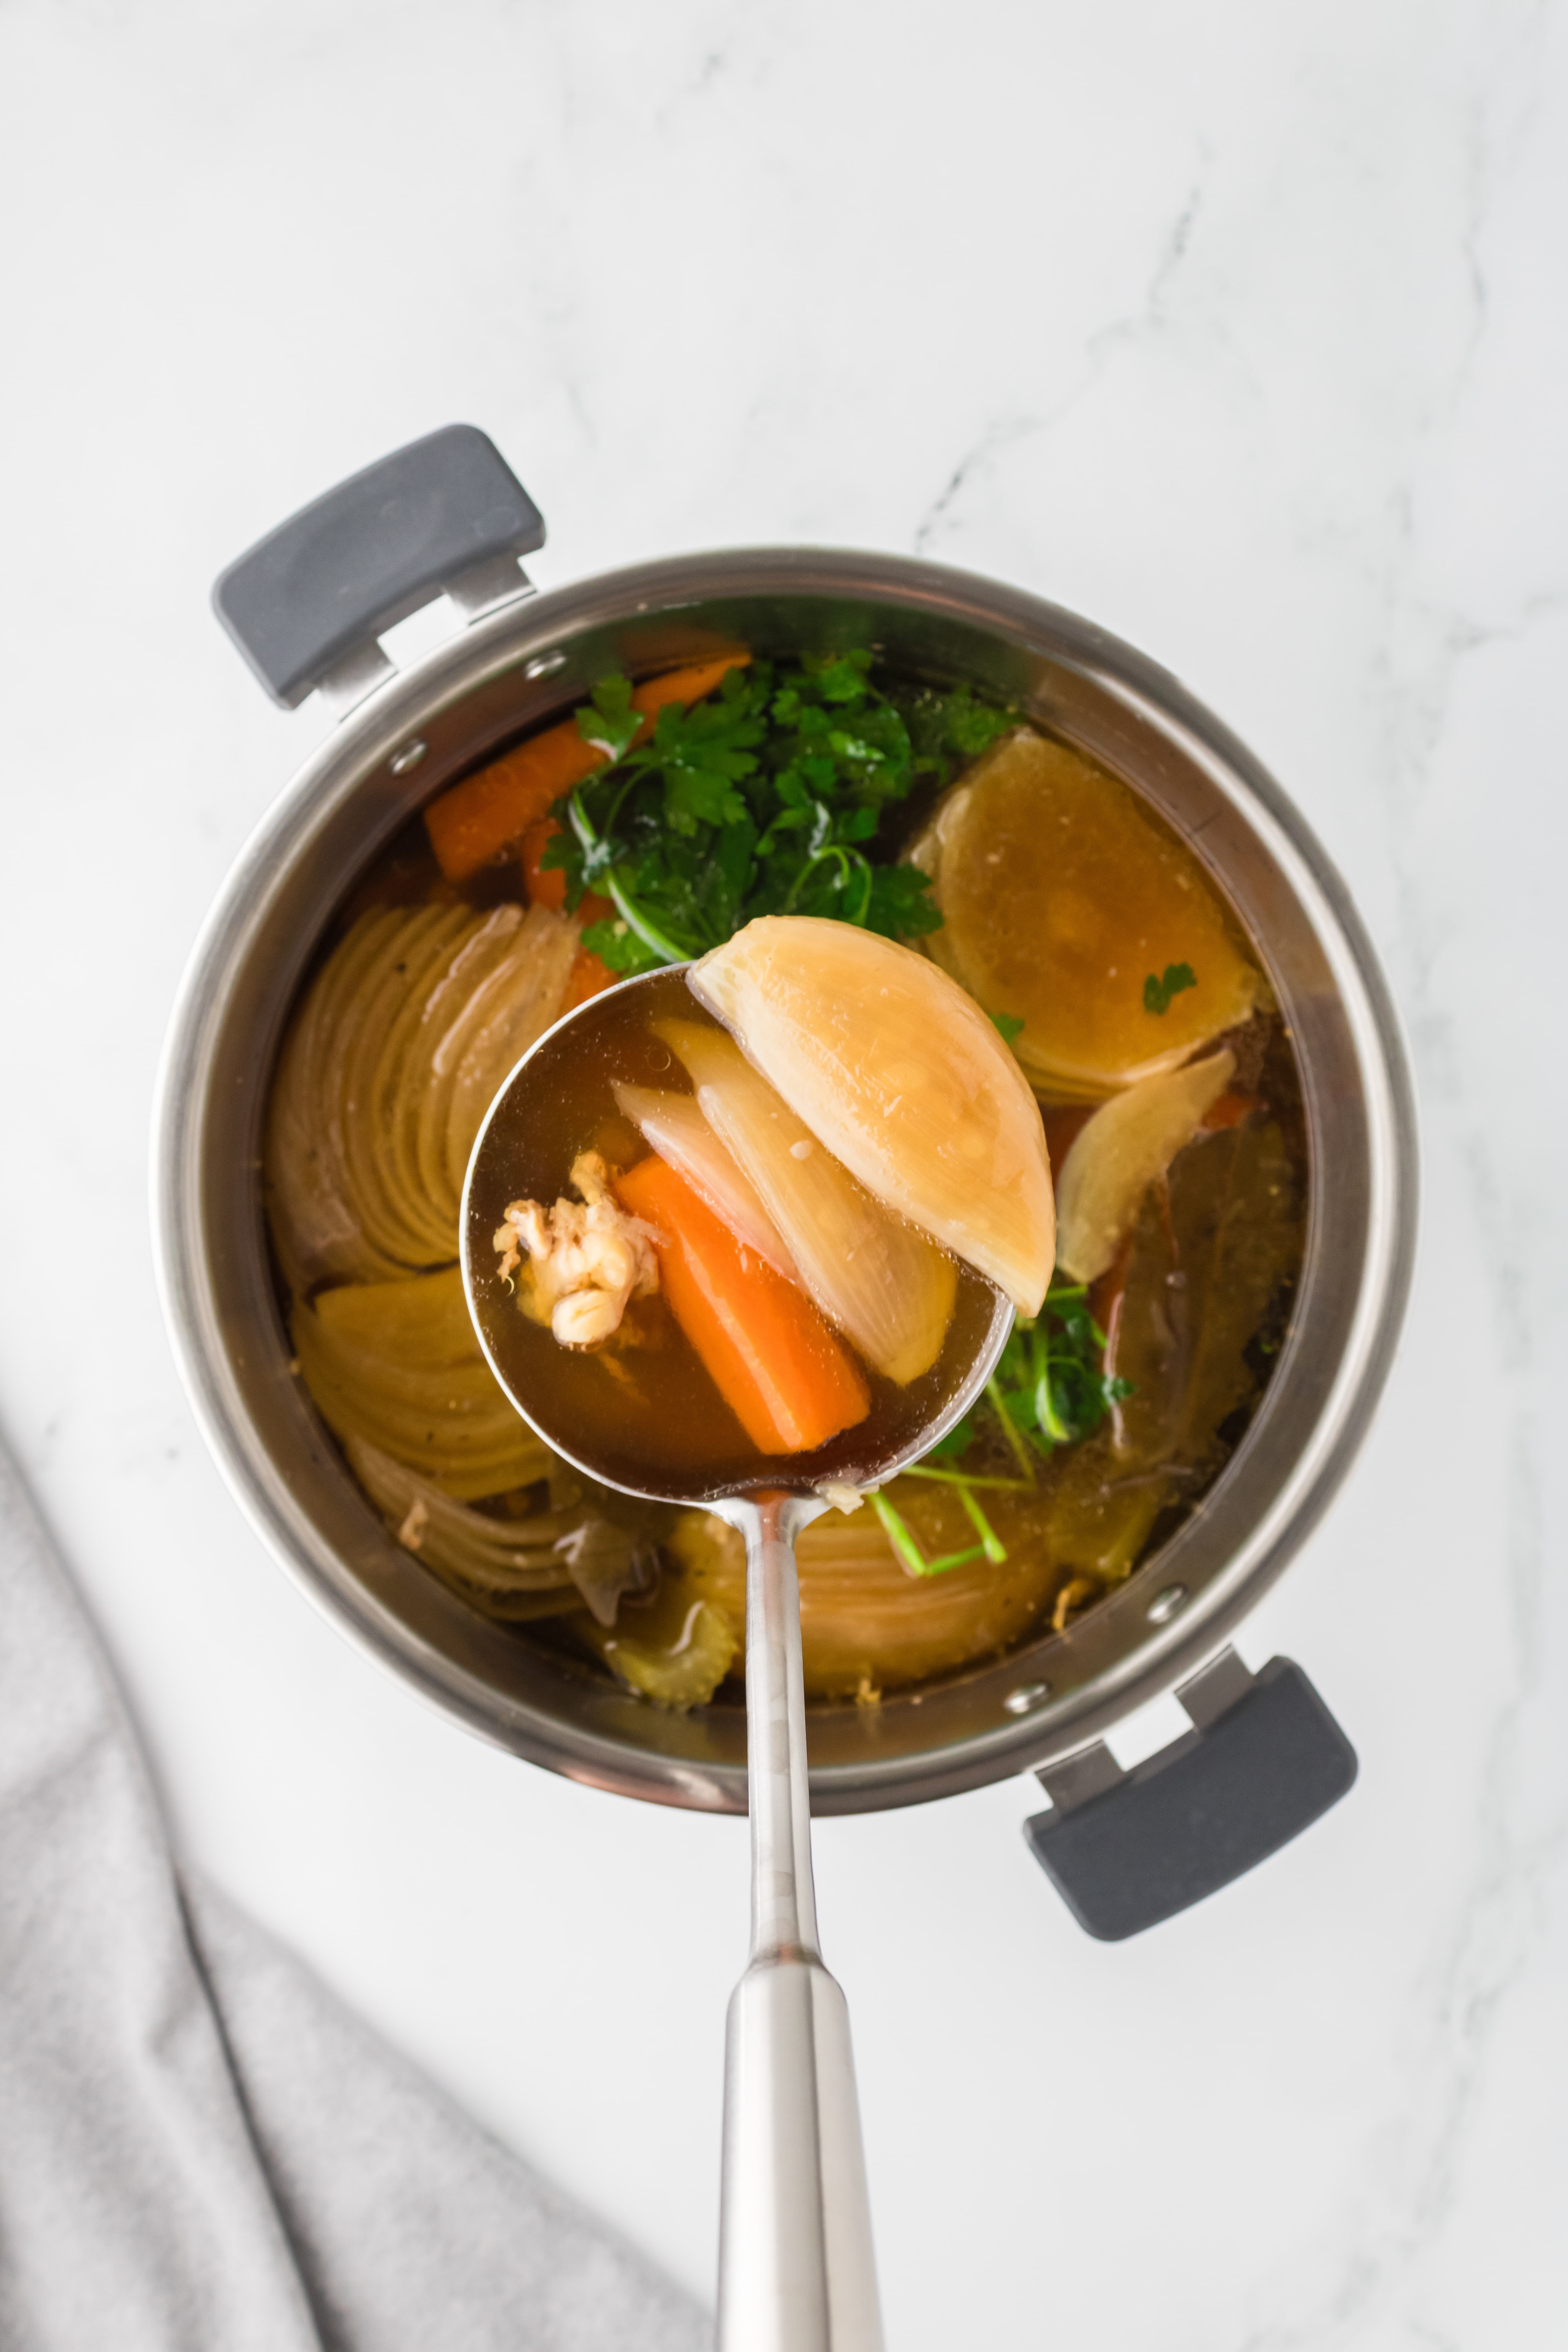 A ladle lifting vegetables from a pot of broth.